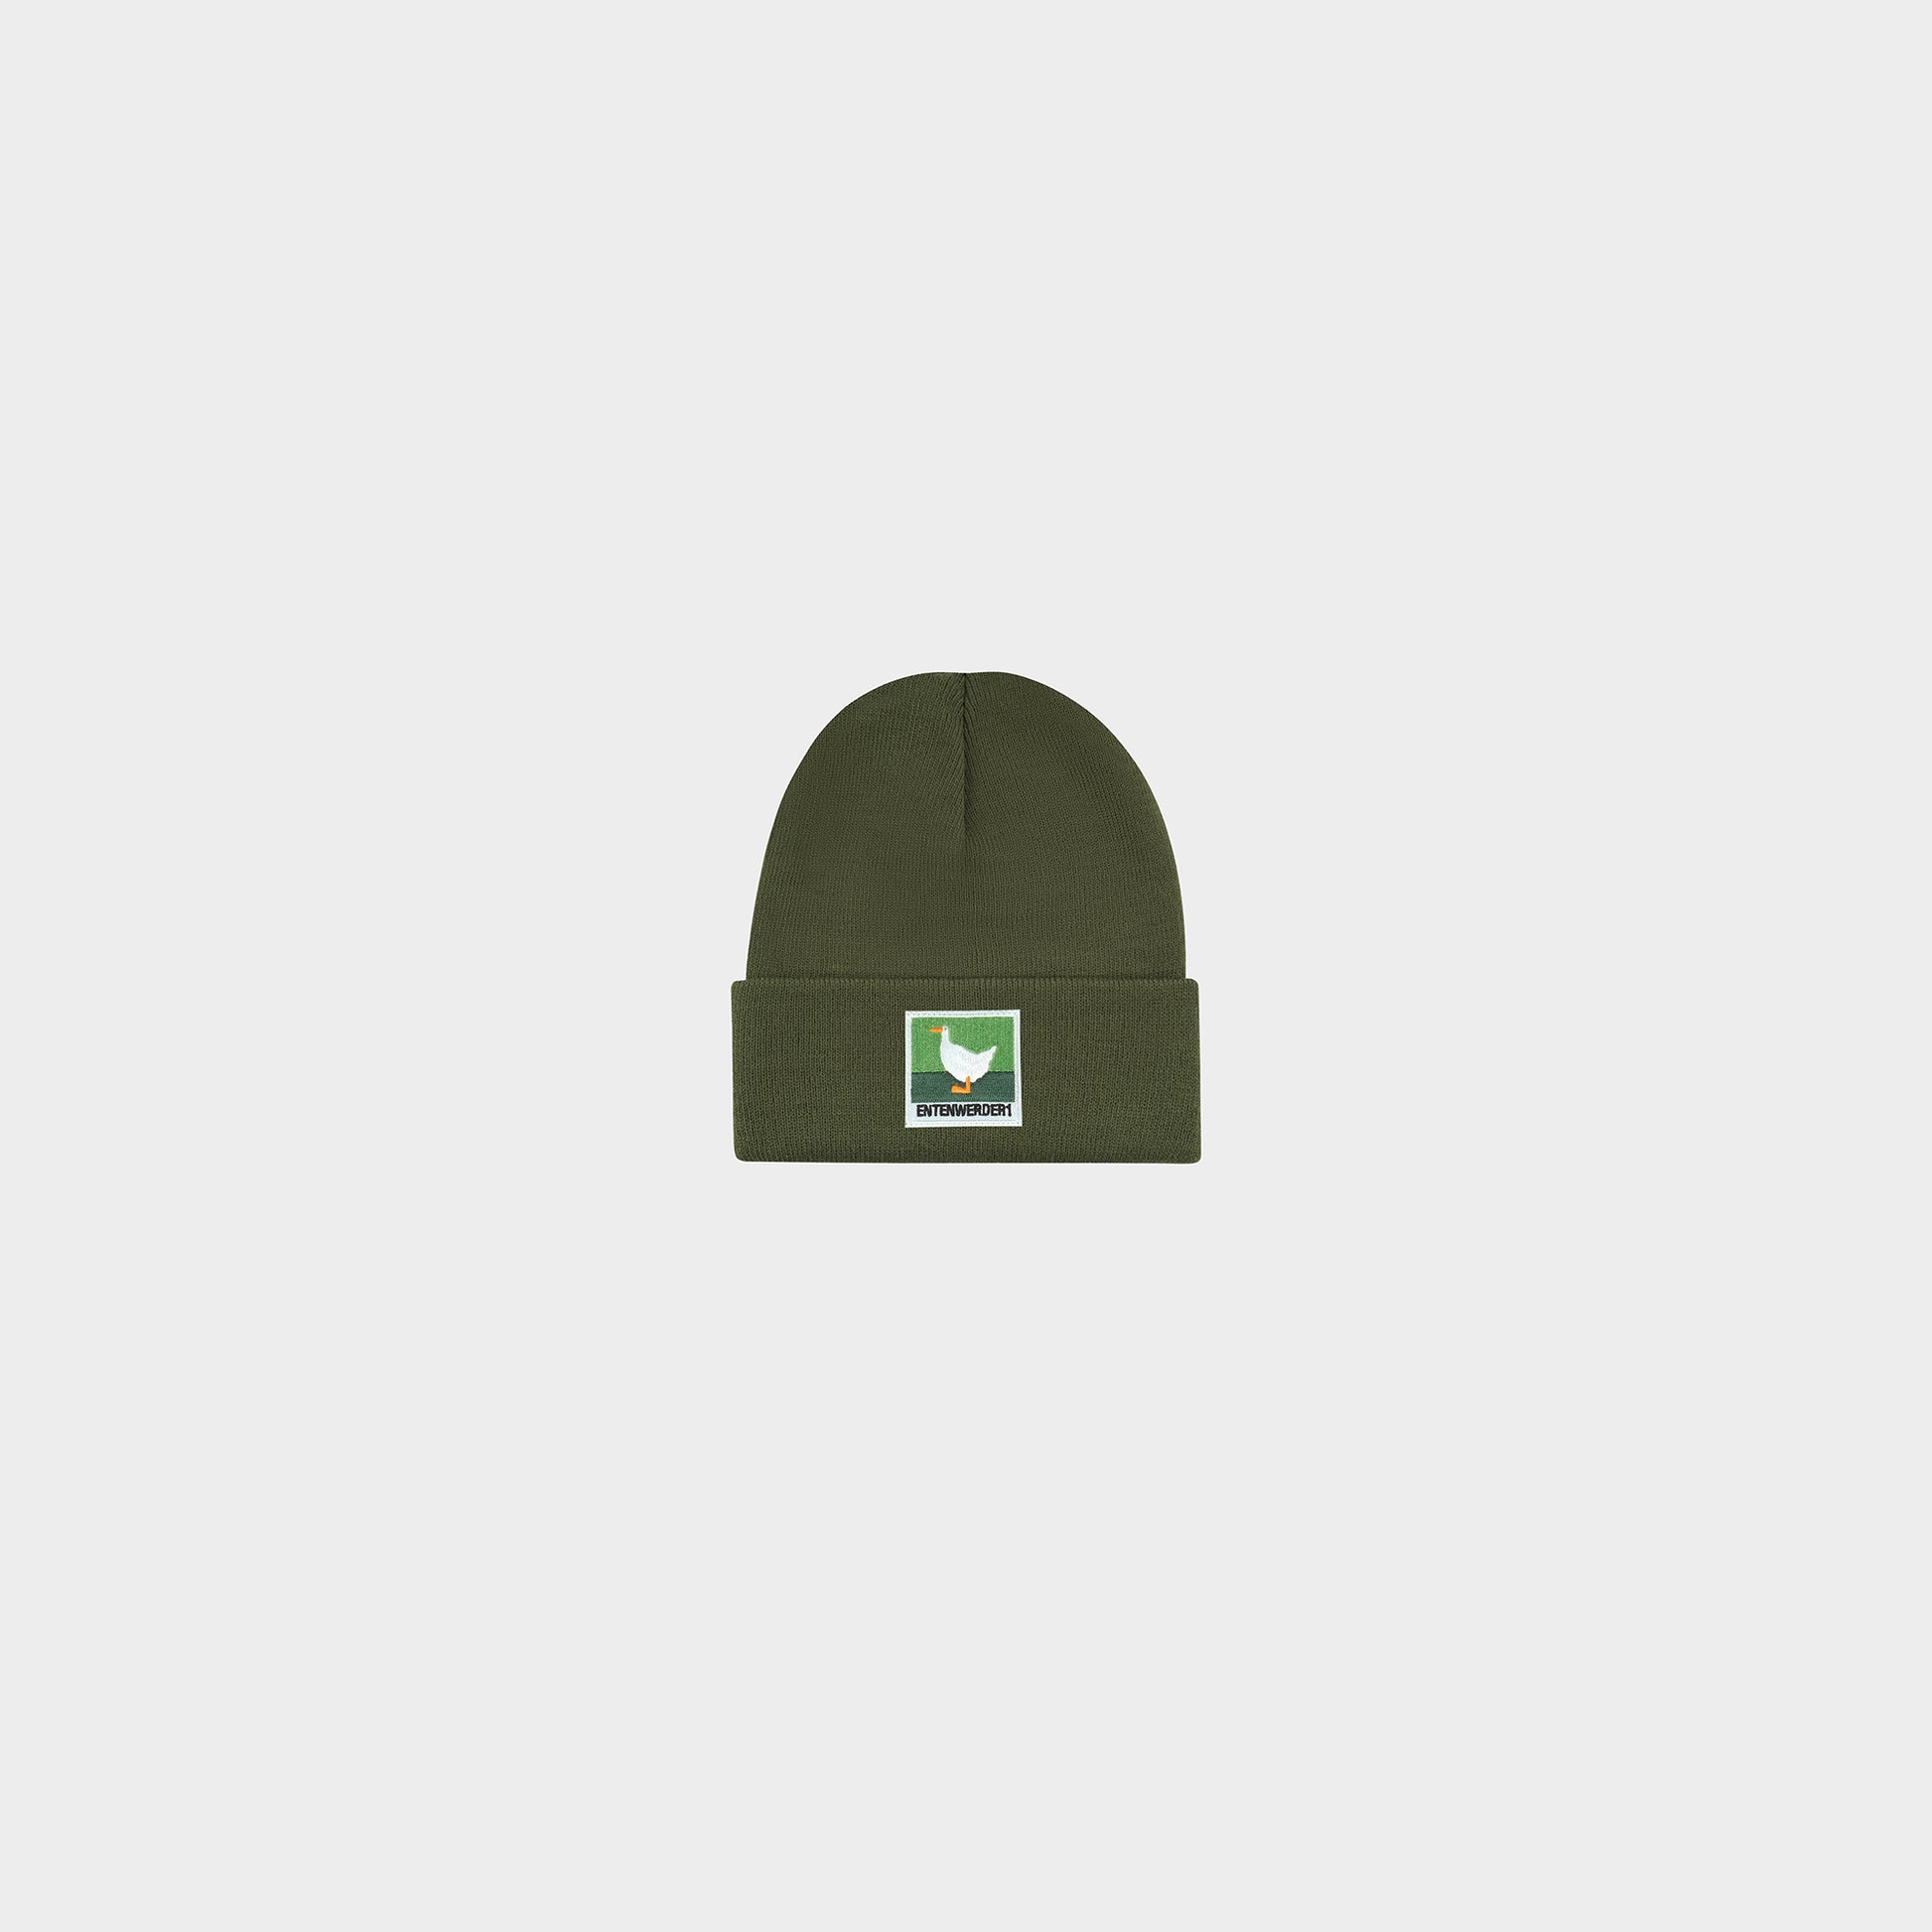 Entenwerder1 Beanie Logo Square in Farbe olive